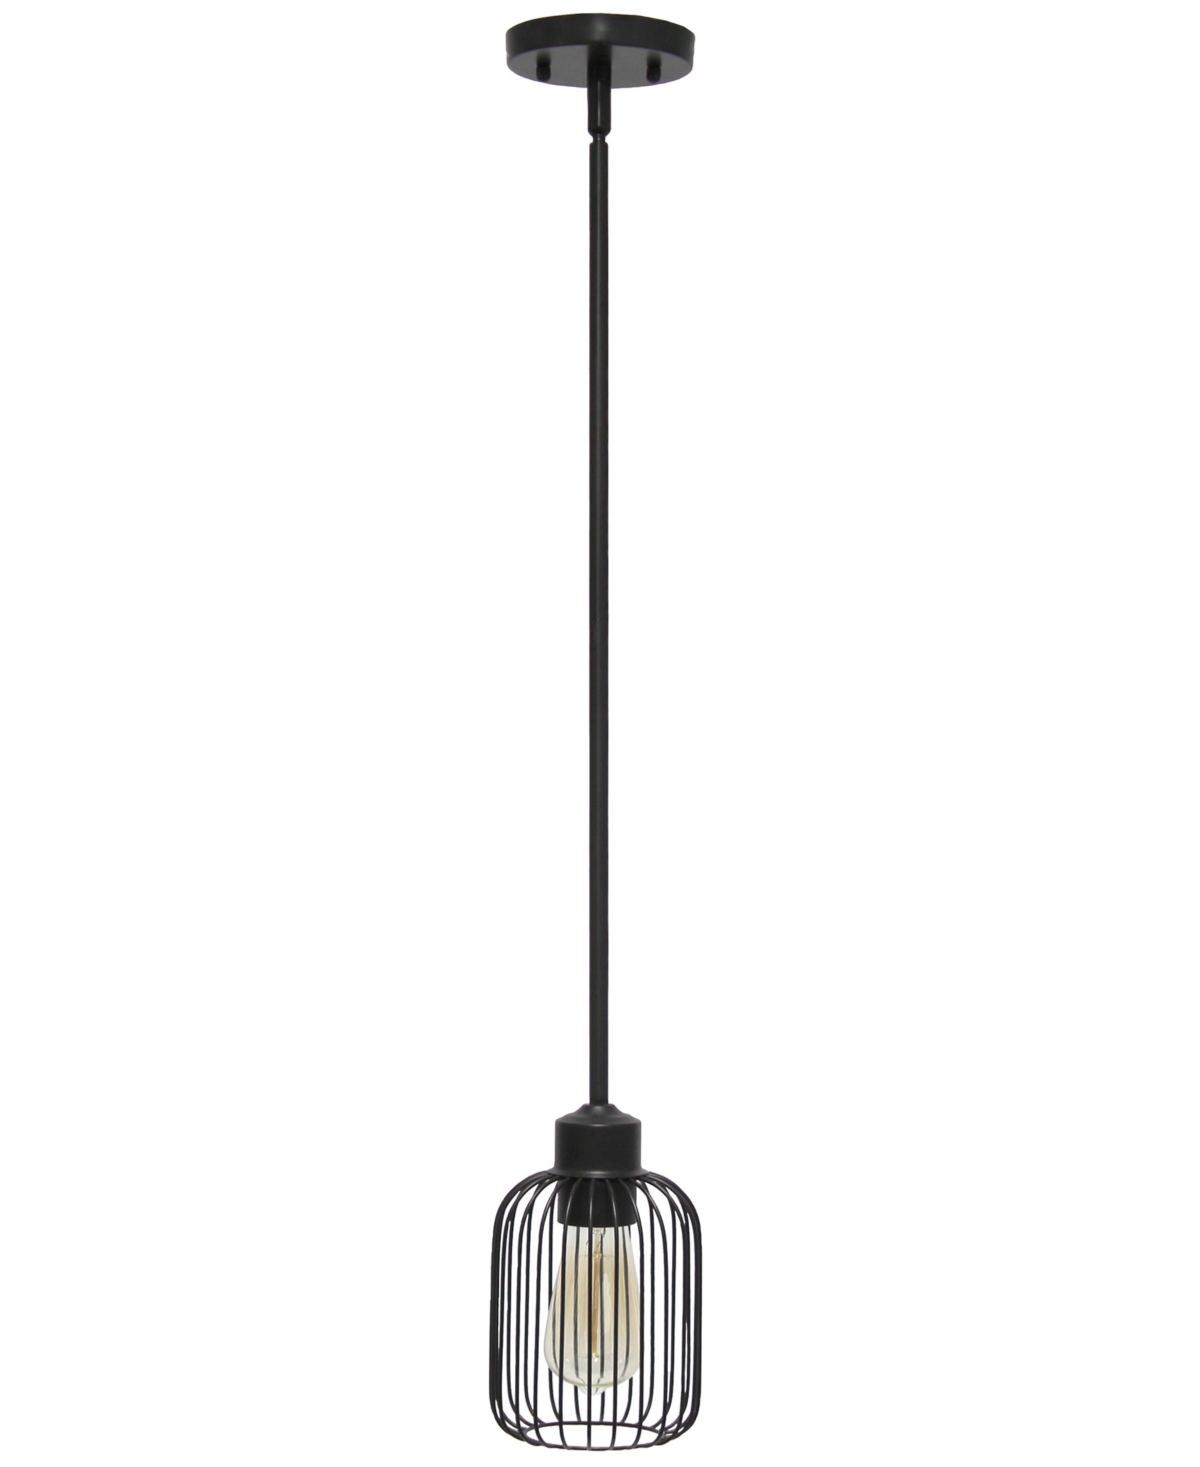 Shop Lalia Home 7" Ironhouse One Light Industrial Decorative Hanging Metal Caged Mini Pendant Ceiling Light Fixture In Black